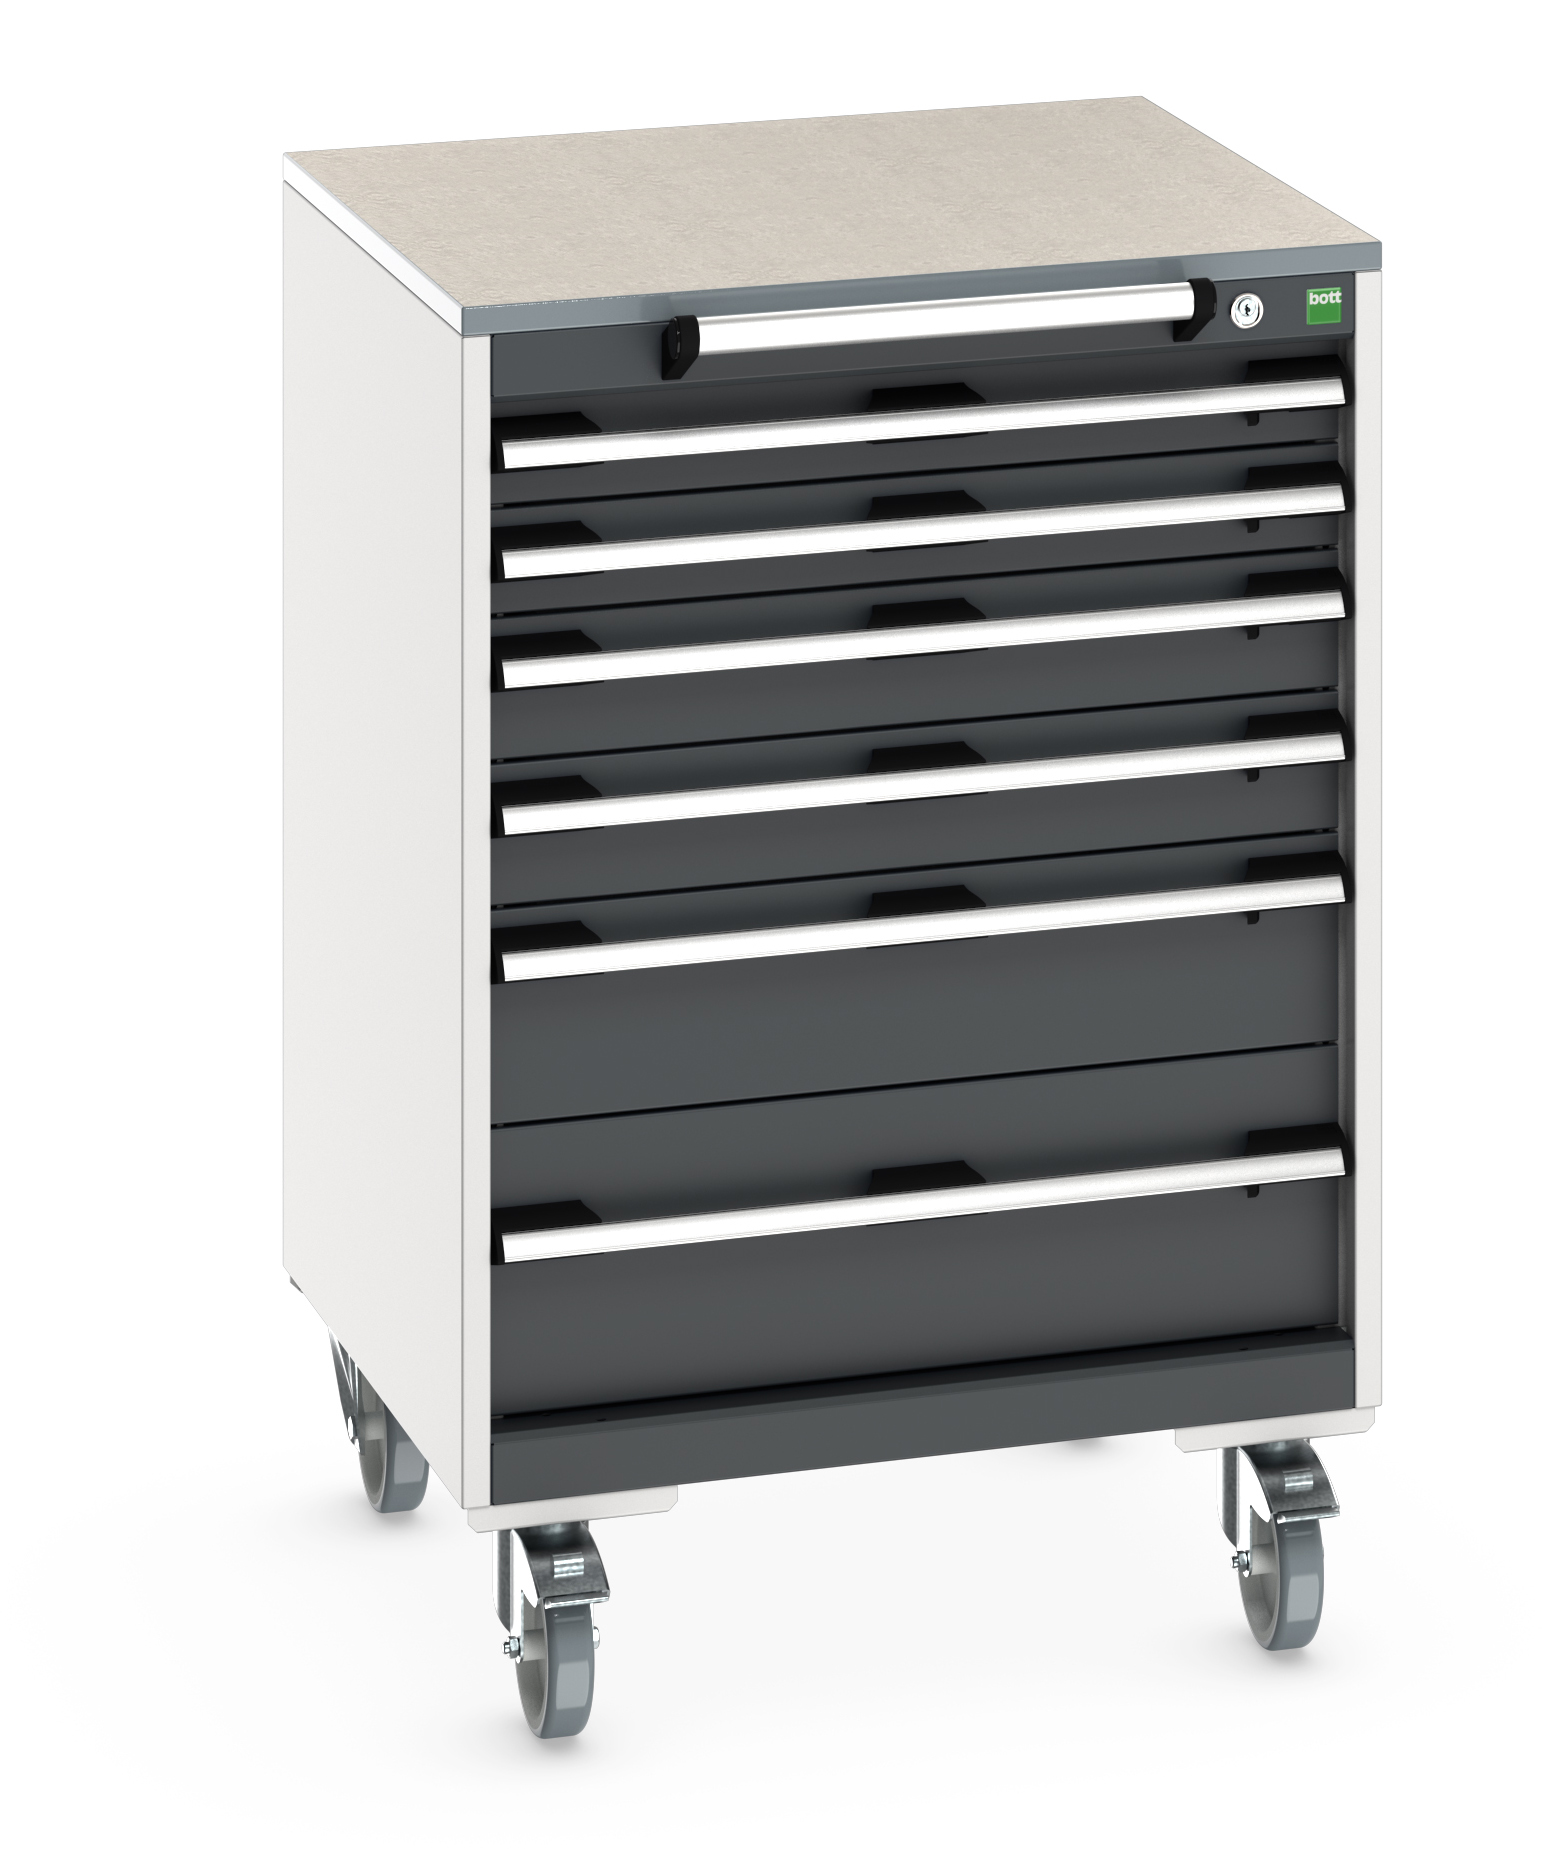 Bott Cubio Mobile Drawer Cabinet With 6 Drawers & Lino Worktop - 40402152.19V